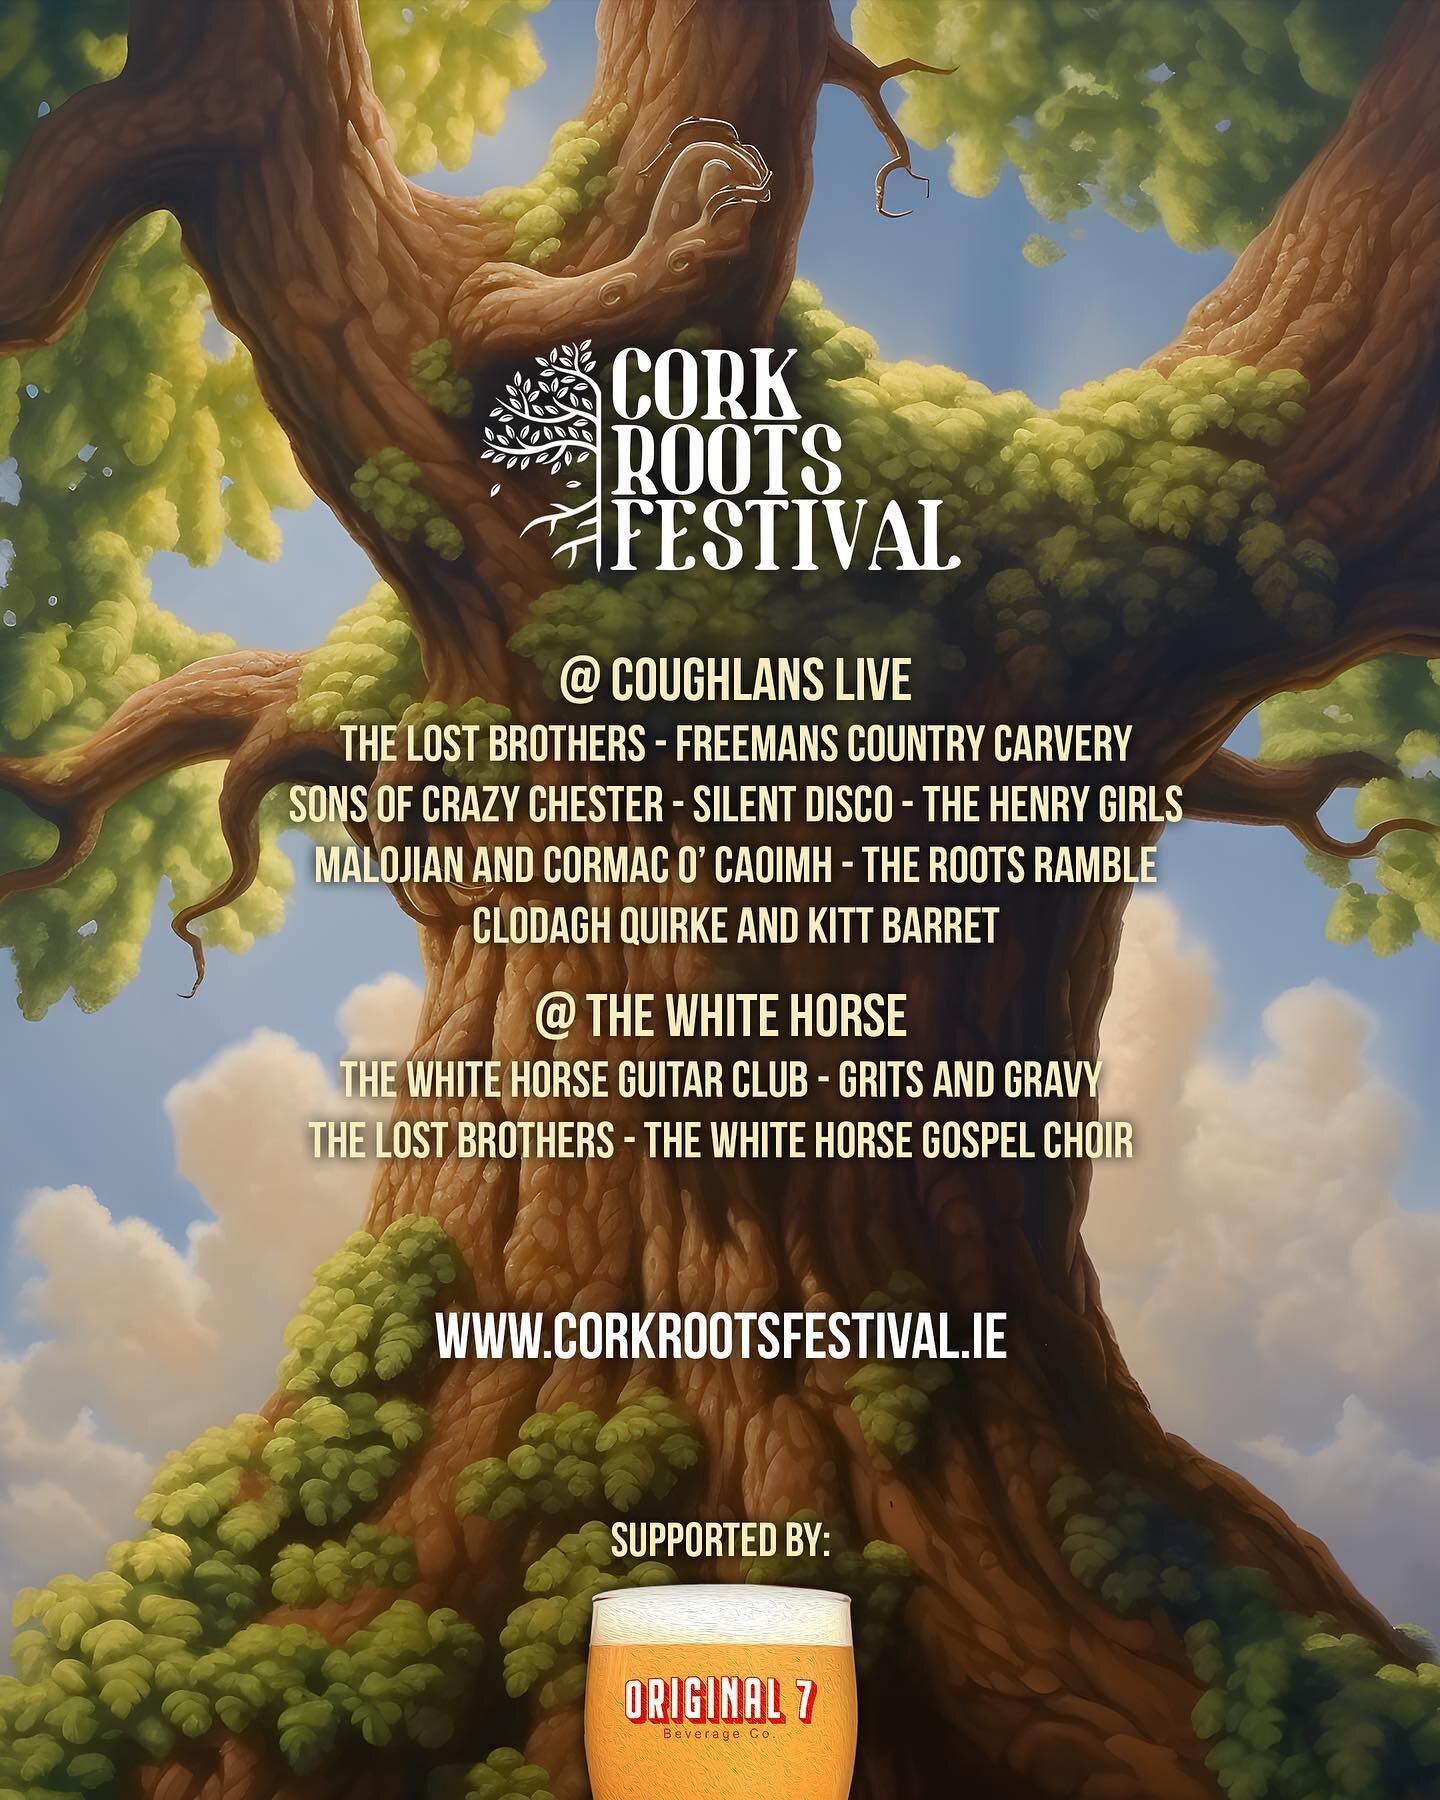 We are thrilled to be supporting The Cork Roots Festival happening from the 11th to 15th May. A brand new Festival taking place at @coughlansbarcork and @thewhitehorsecork with some amazing acts👌🏻

You can find more info on their website:
www.corkr